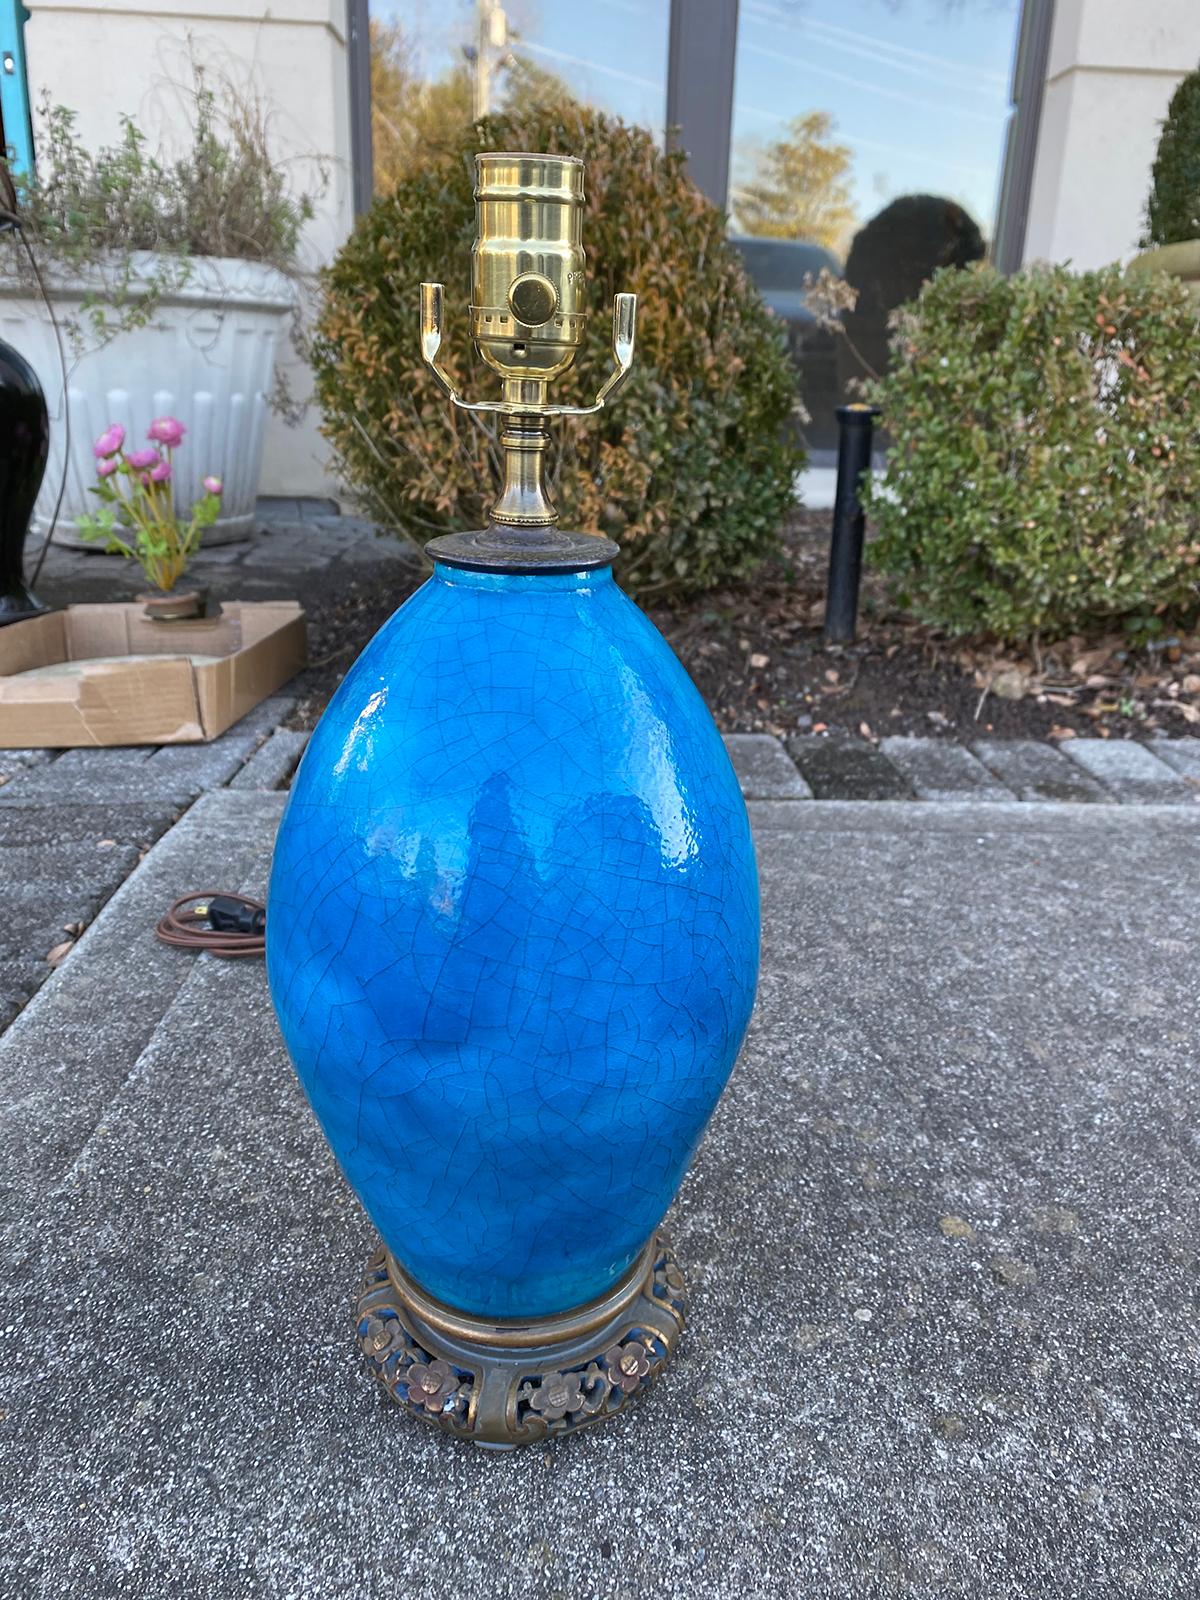 19th century turquoise blue crackle glaze bronze mounted porcelain table lamp on wooden base.